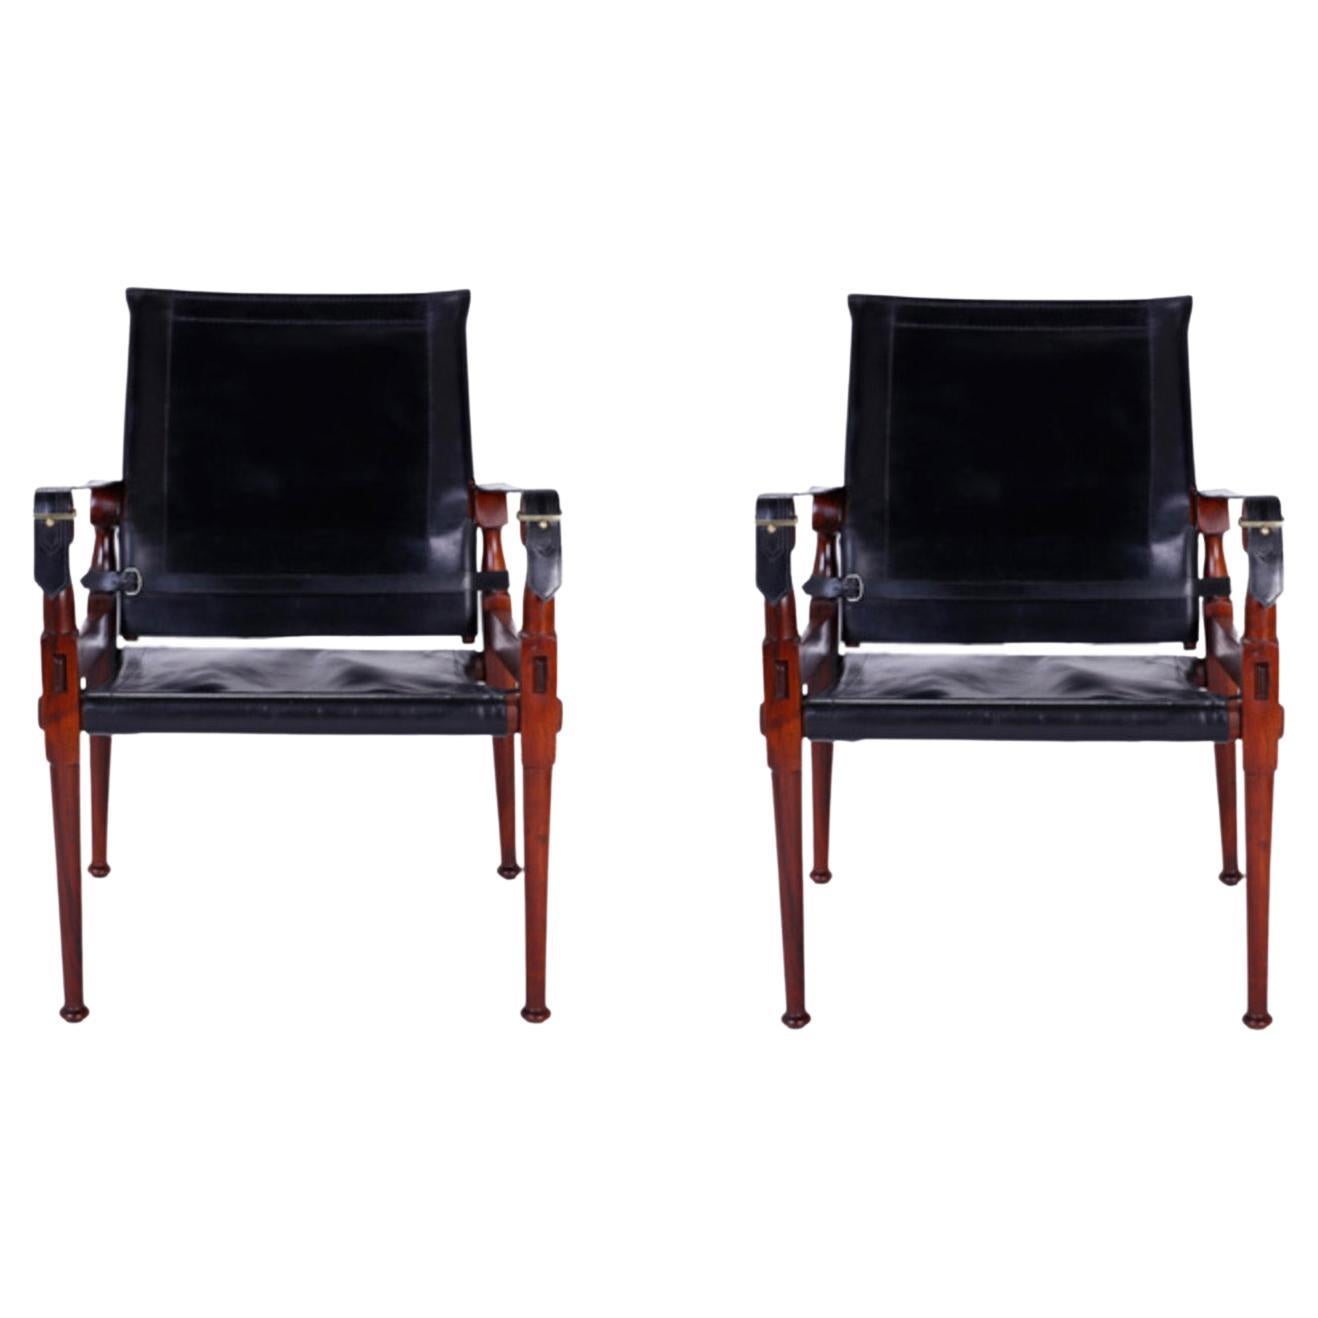 Pair of Vintage Campaign Safari Chairs